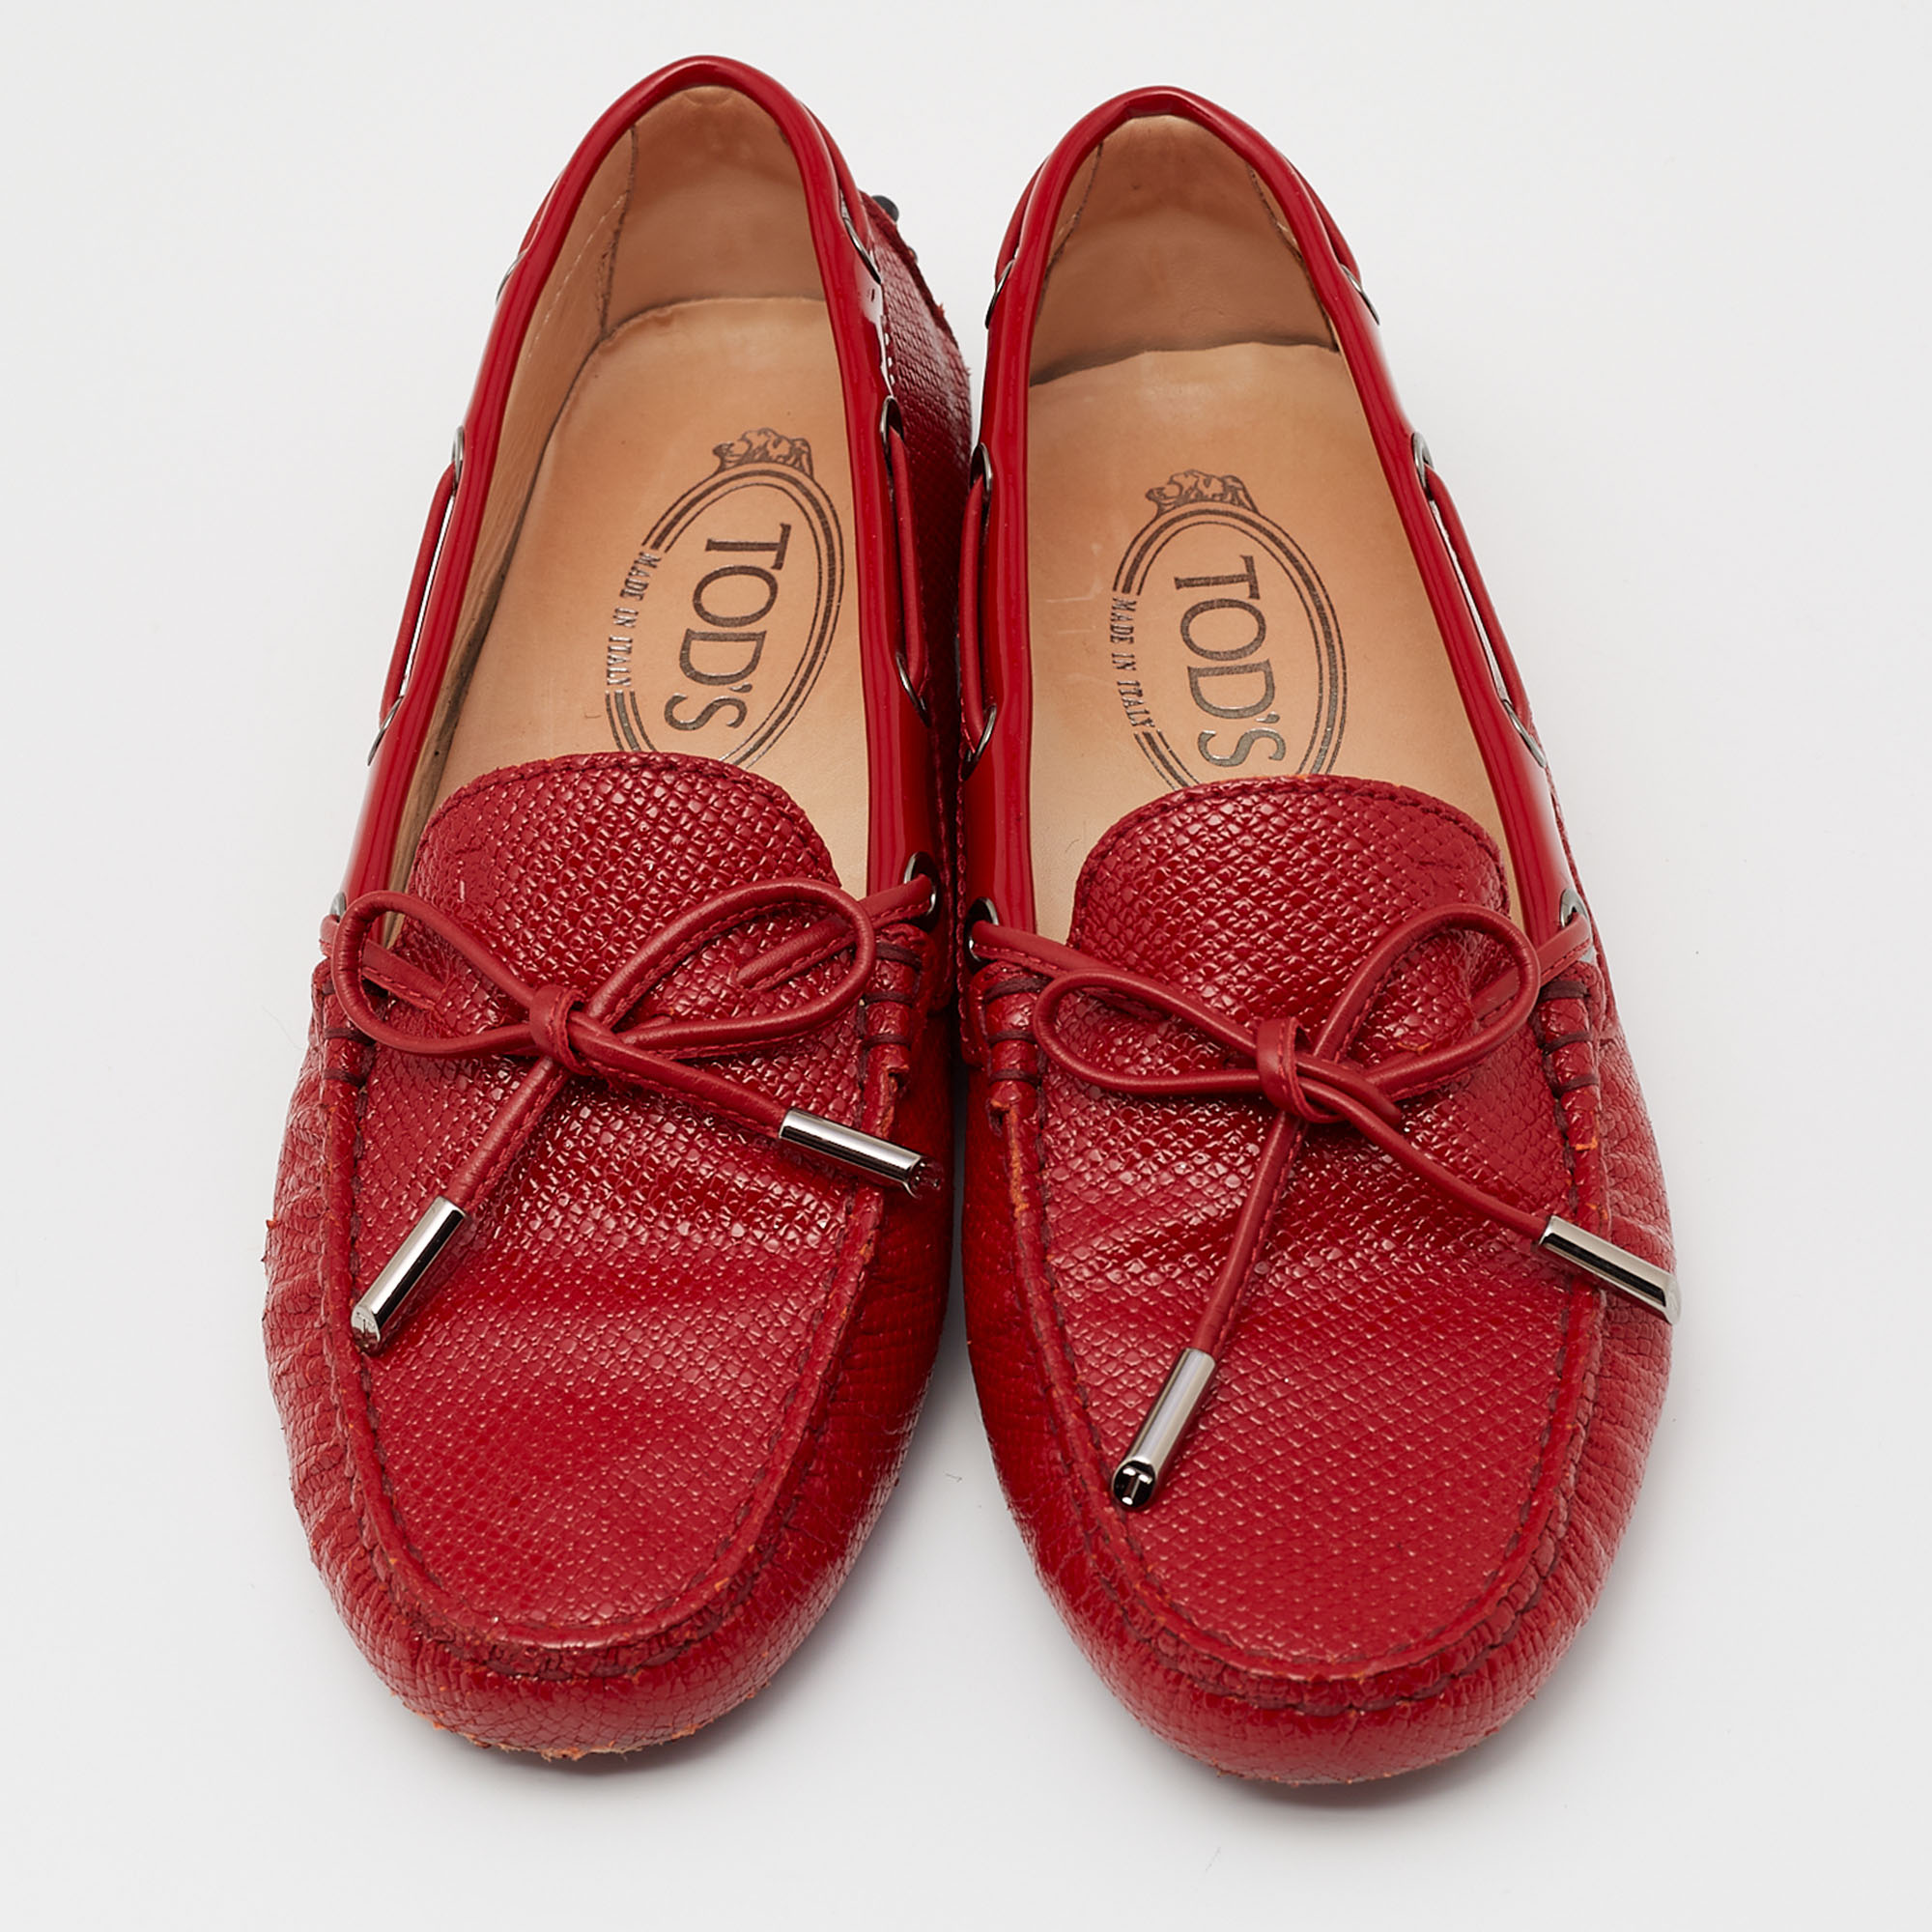 Tod's Red Patent Bow Slip On Loafers Size 36